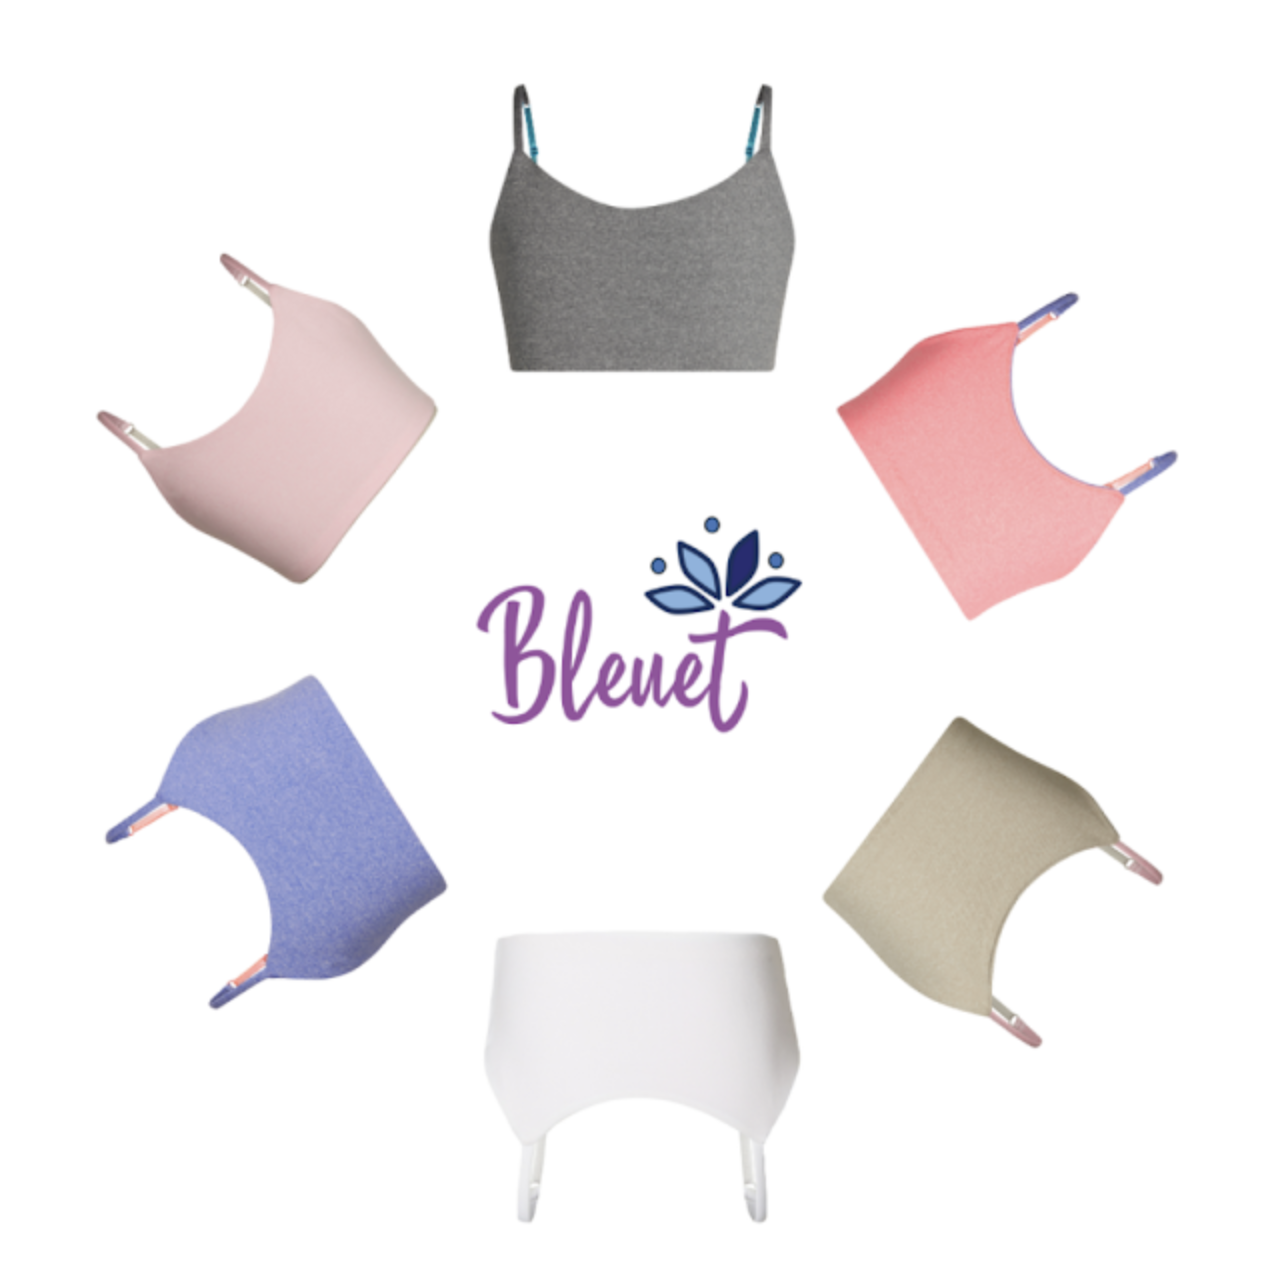 Bleuet's Reversible Bras for Teens – Get Two Options in One